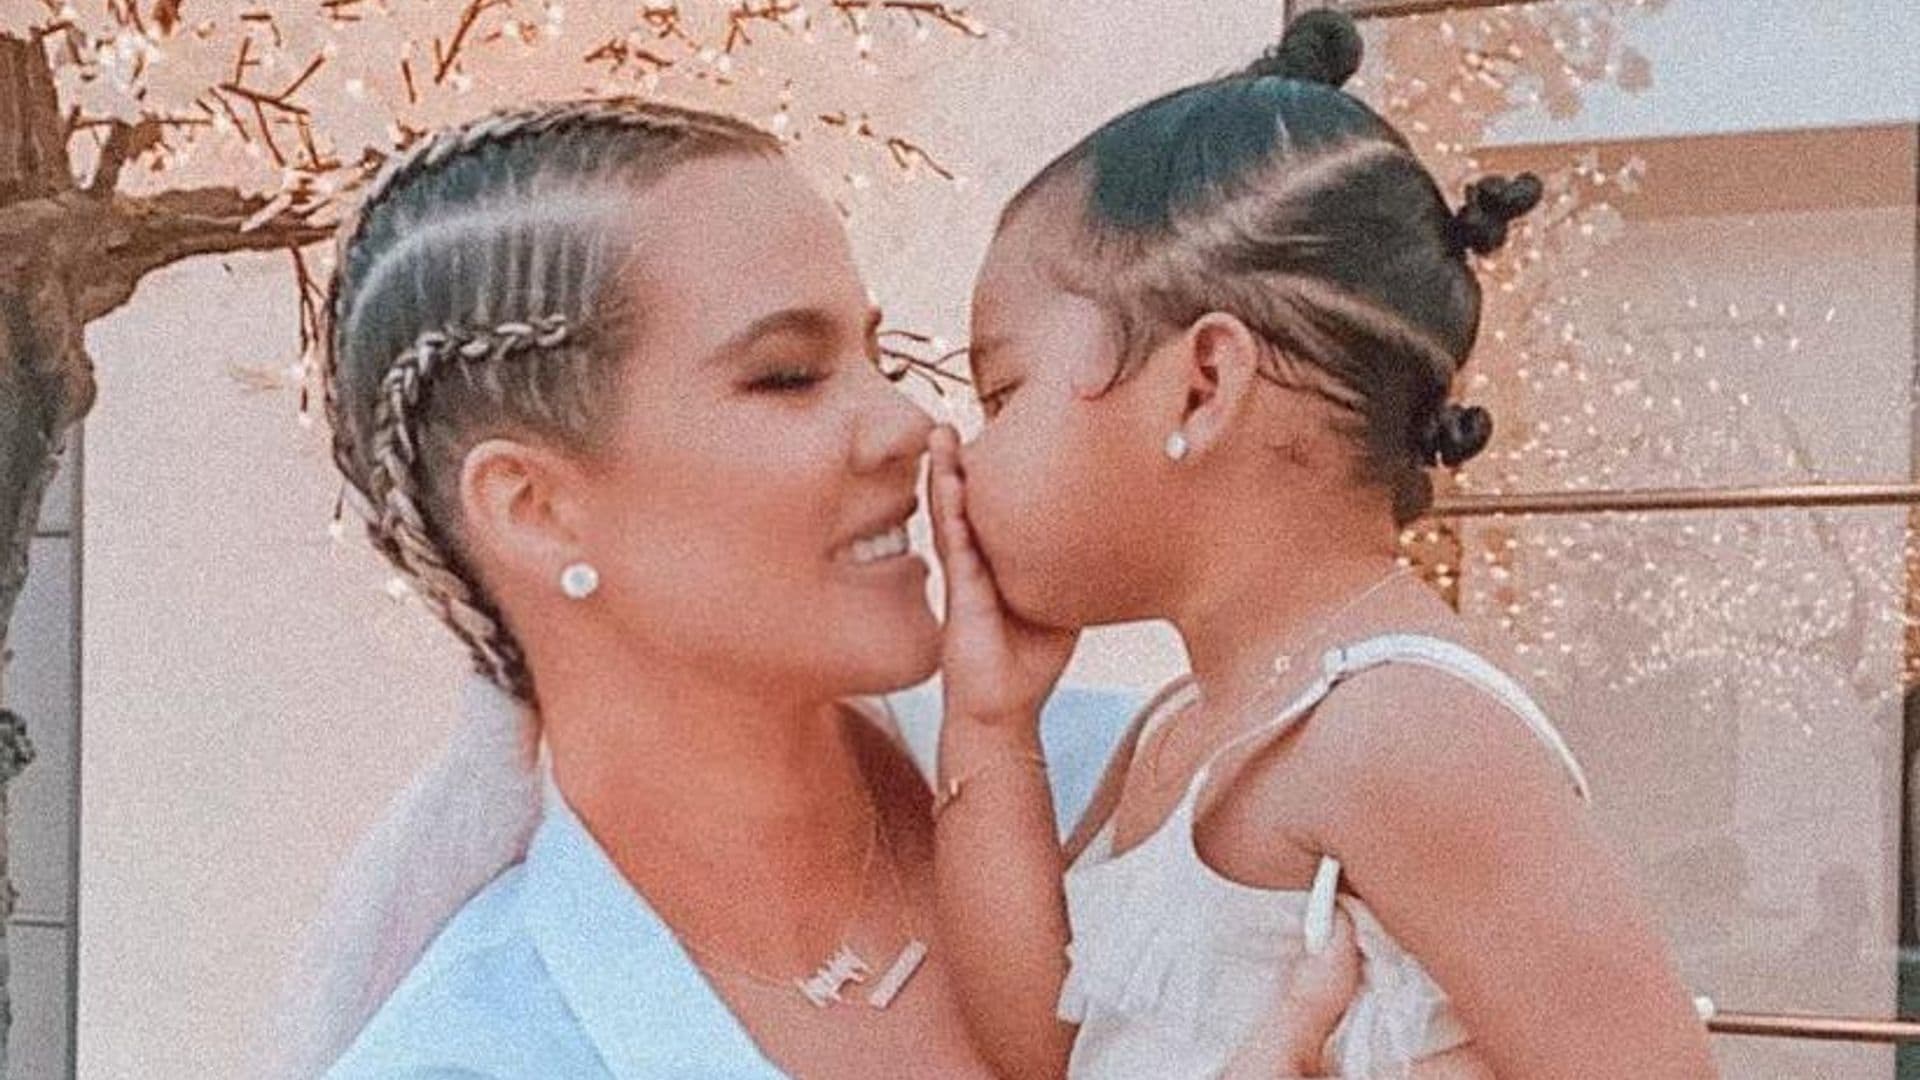 Khloé Kardashian’s baby girl True proves to be the best workout buddy